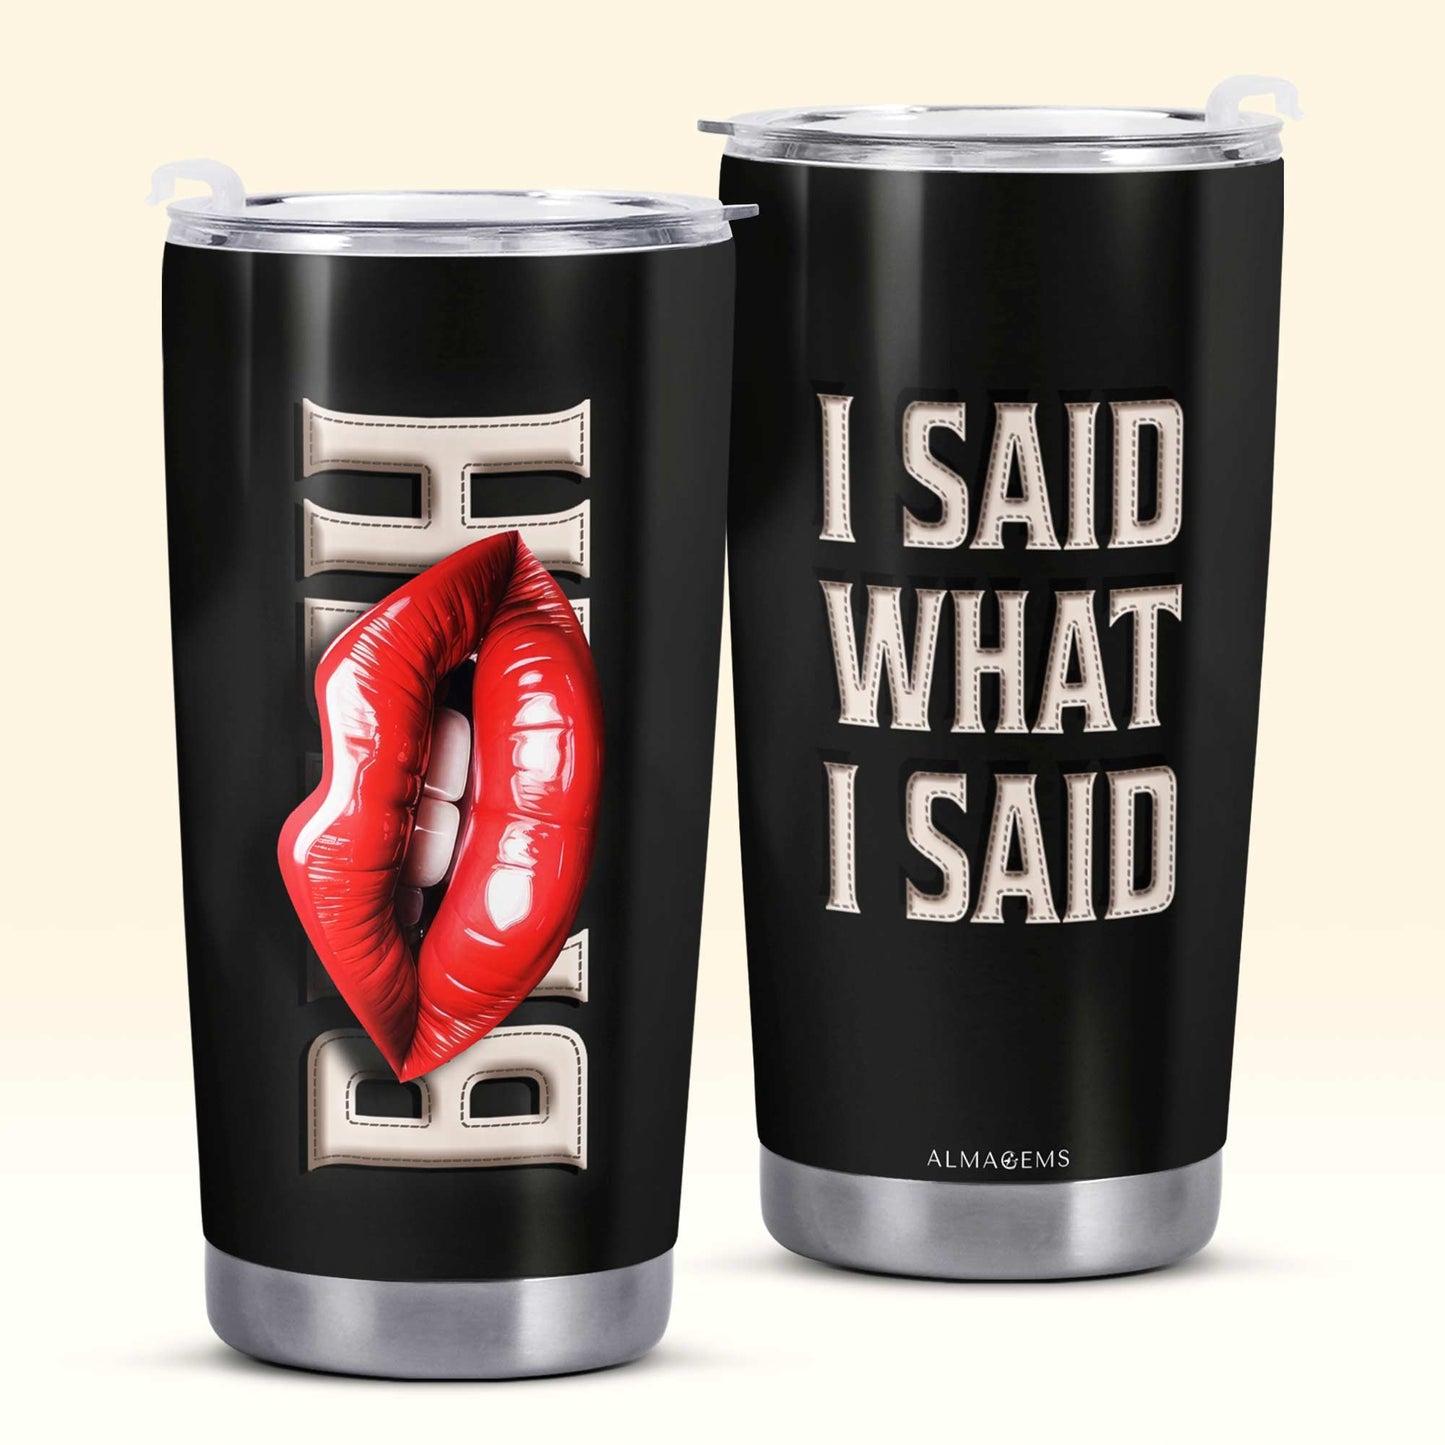 I SAID WHAT I SAID - Personalized Stainless Steel Tumbler 20oz - BIS07TB